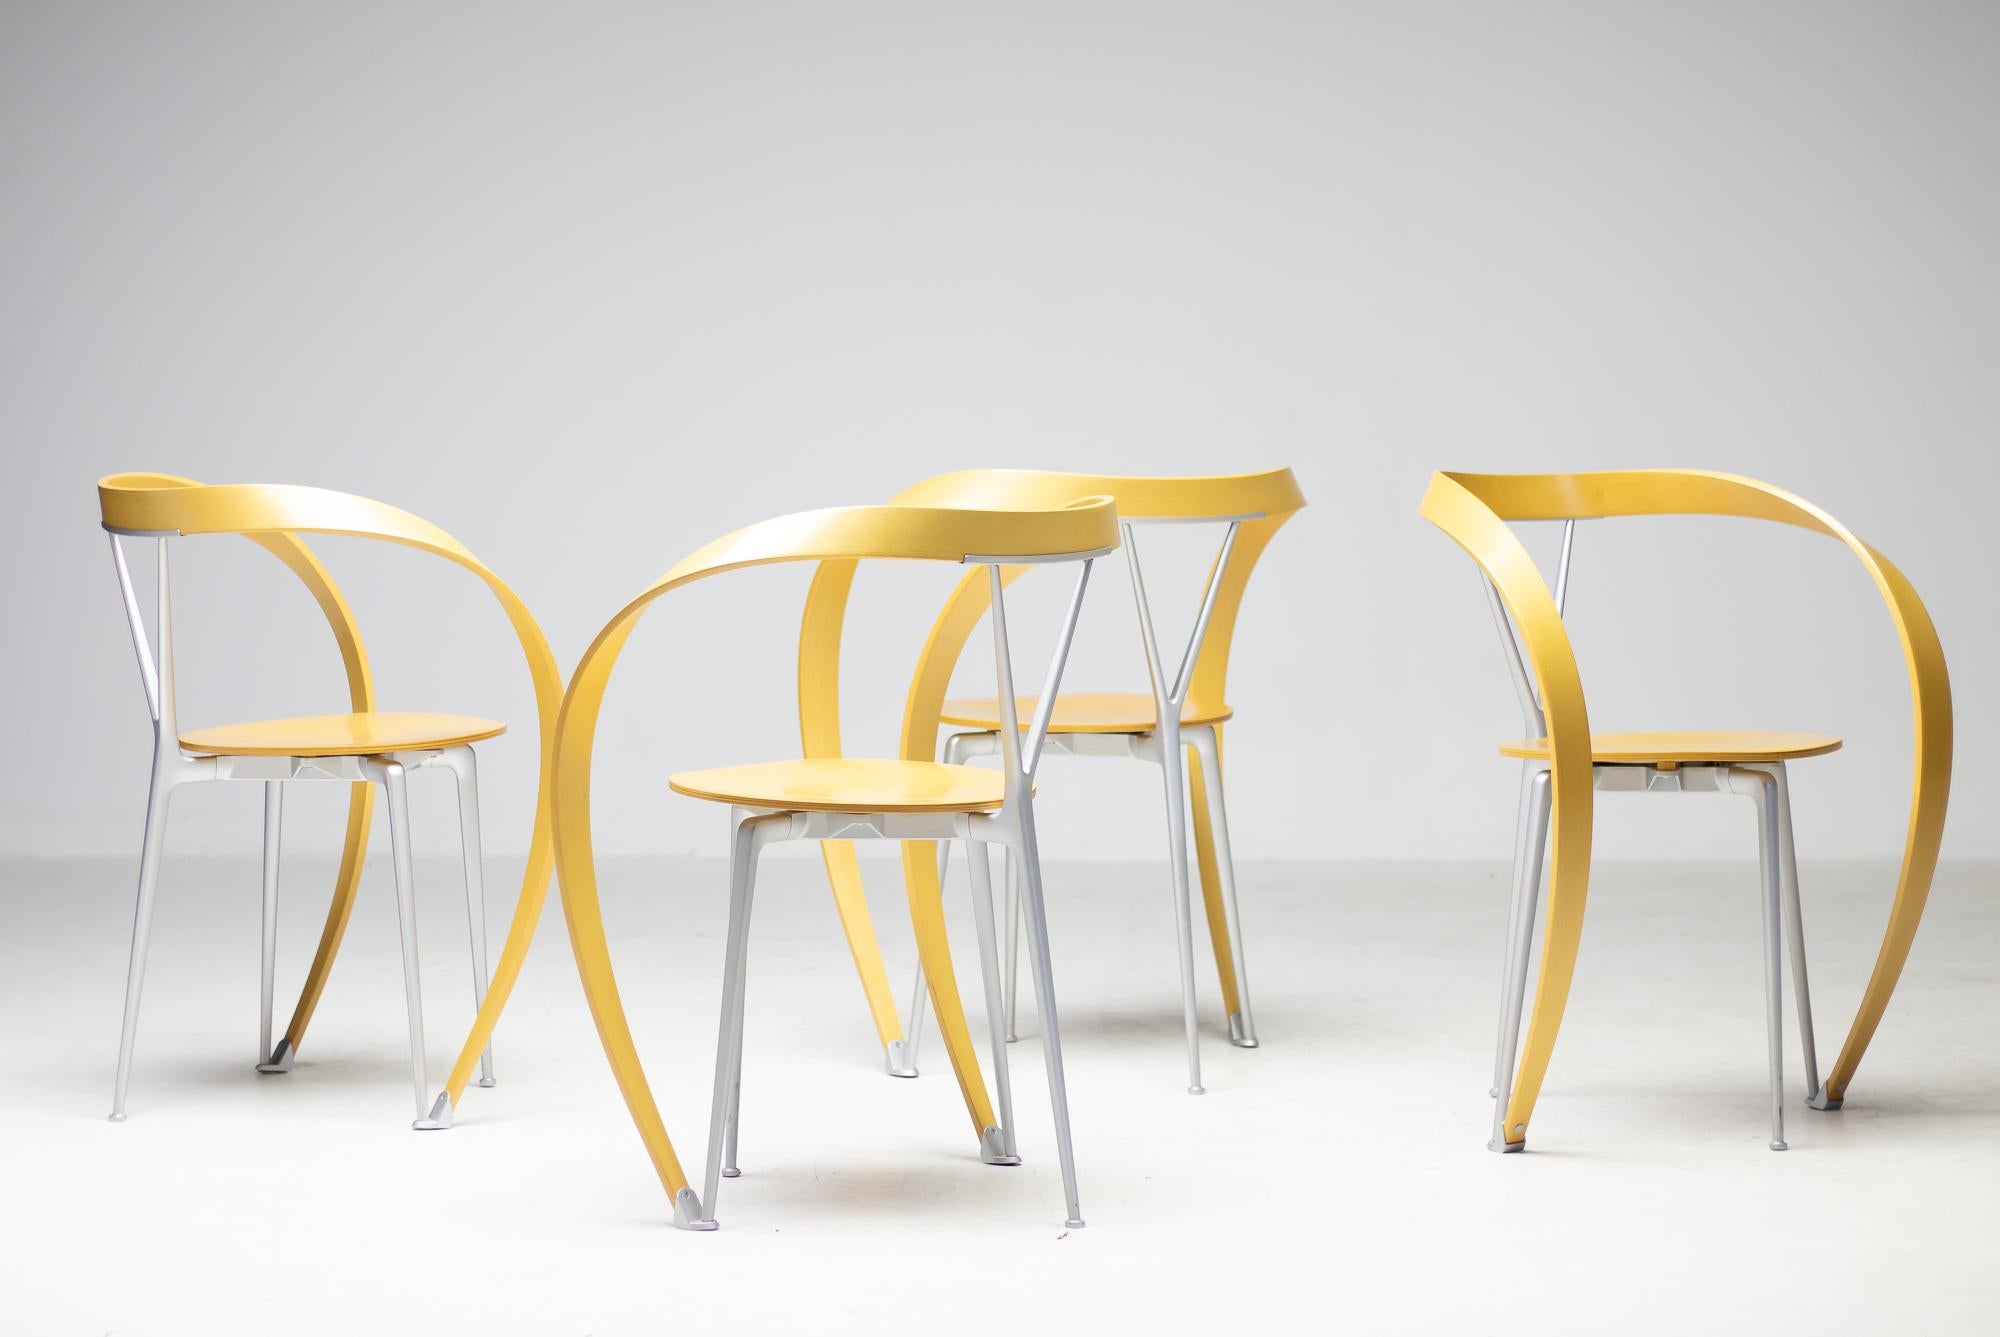 Aluminum Set of Four Revers Chairs by Andrea Branzi for Cassina, Italy